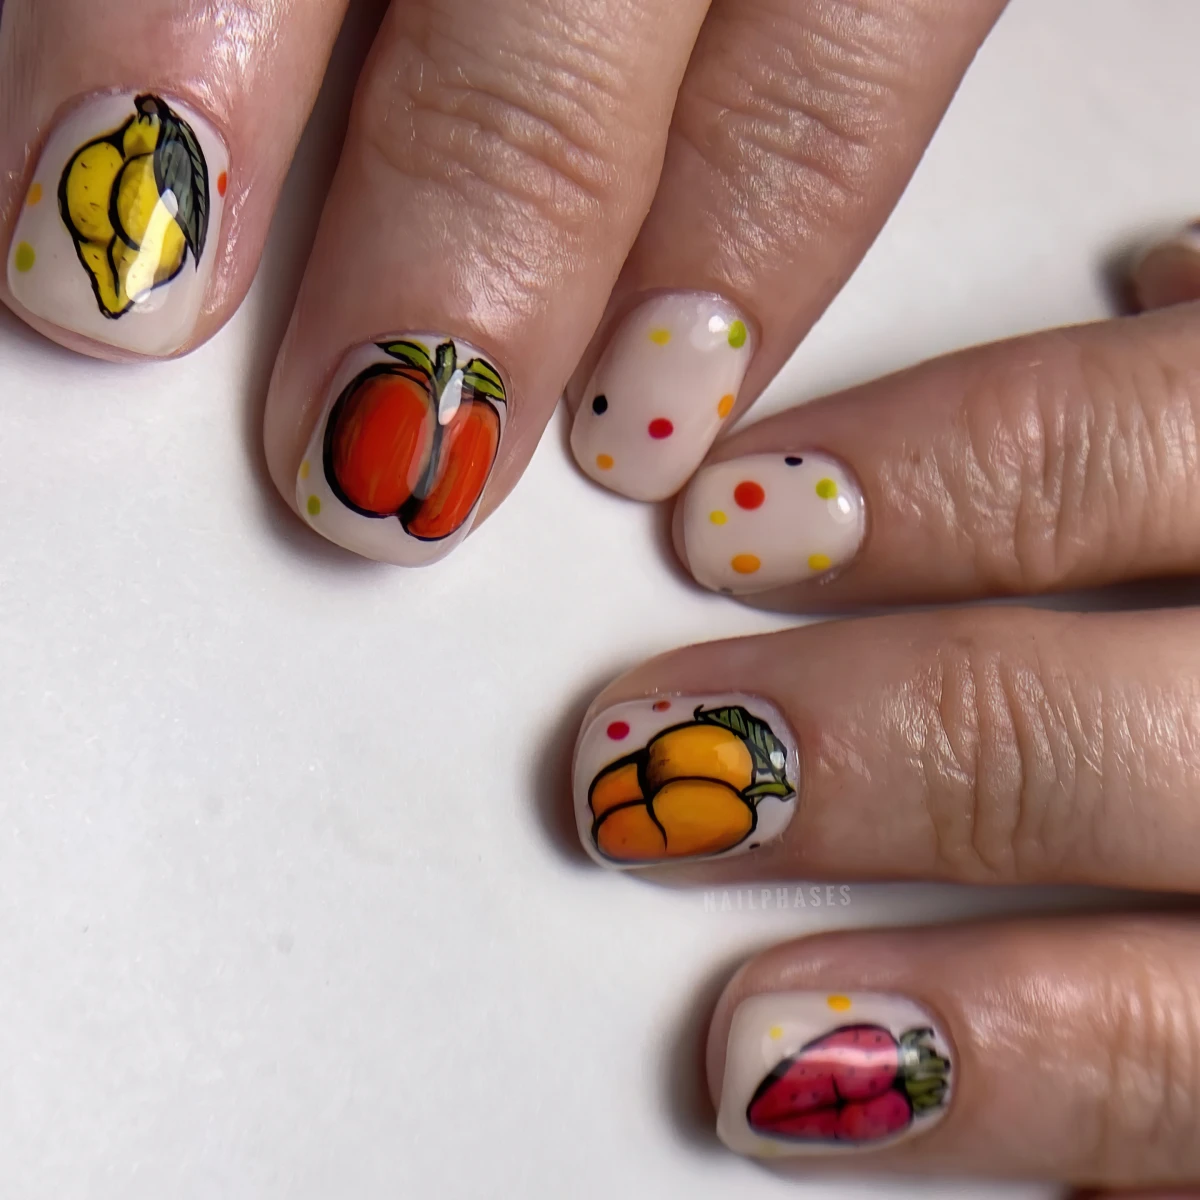 sommer manikuere mit obst nailphases